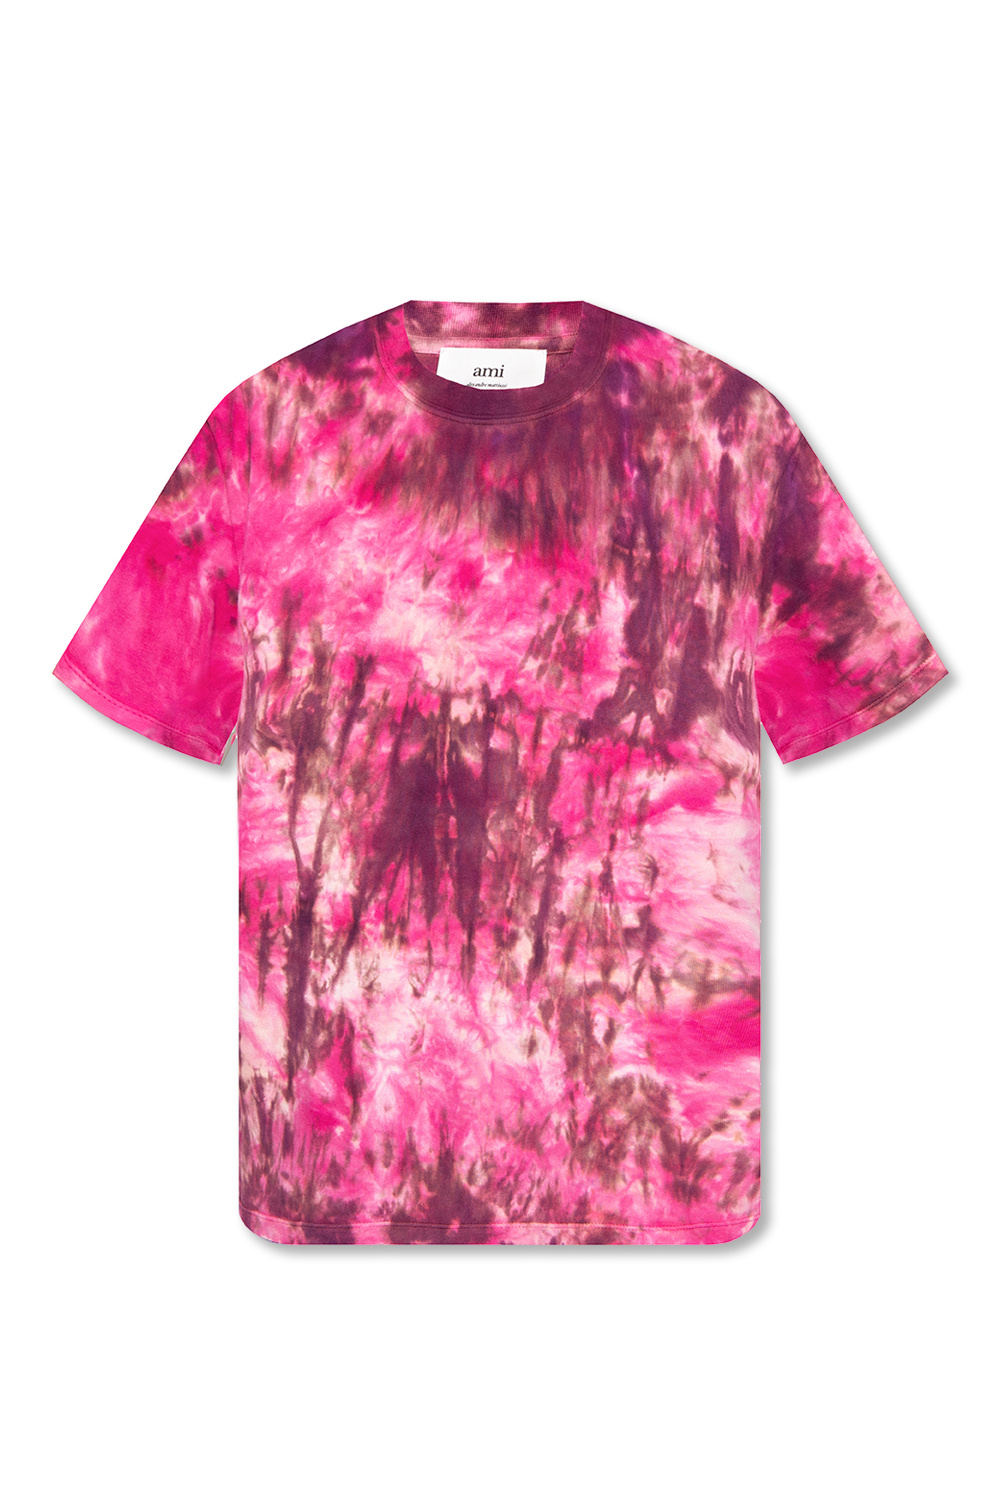 is expected to hit select Nike Sportswear retailers on September 6th Tie-dye T-shirt